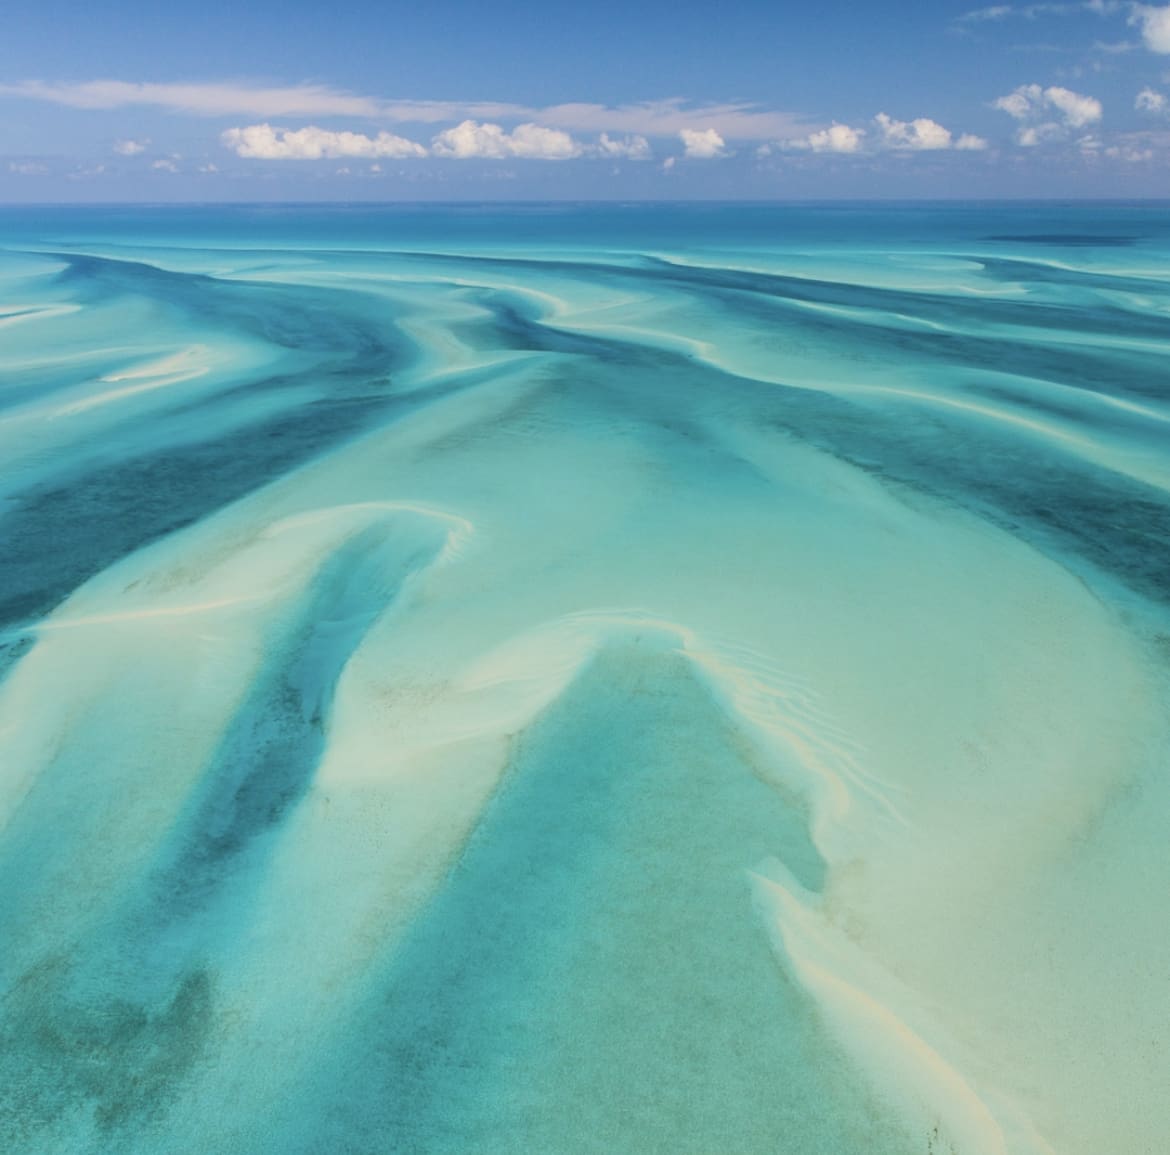 Views of the Schooner Cays and it's crystal blue waters from above